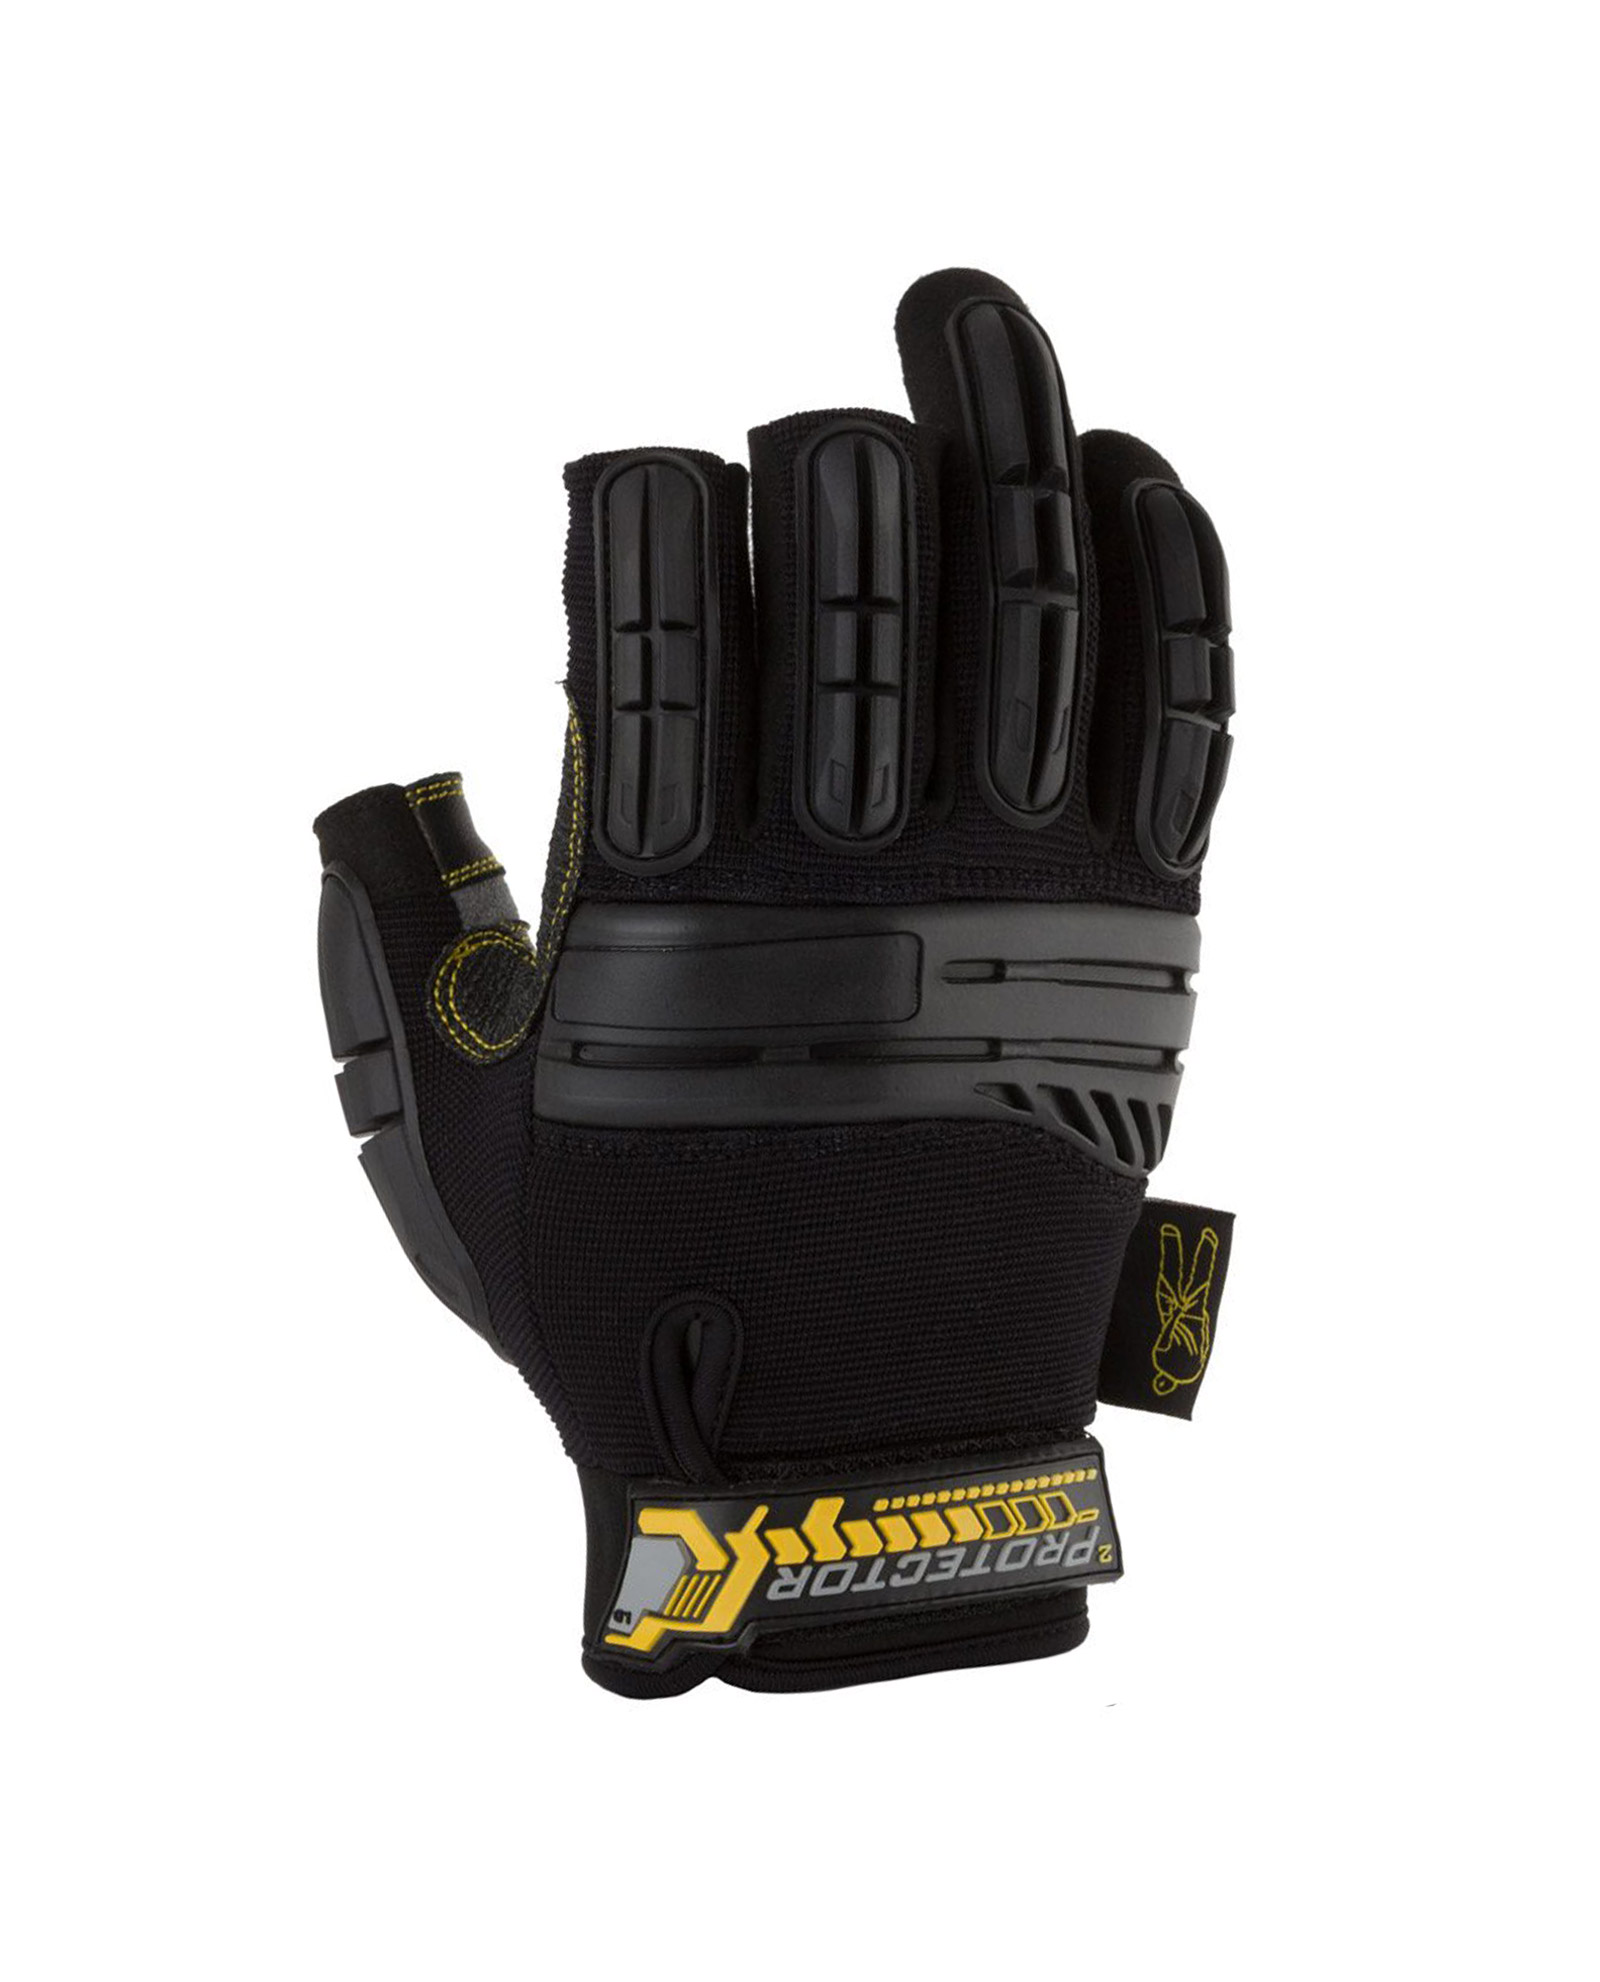 Dirty Rigger Glove Dty Protecfrm Protector™ Framer 2.0 Heavy Duty Rigger Glove